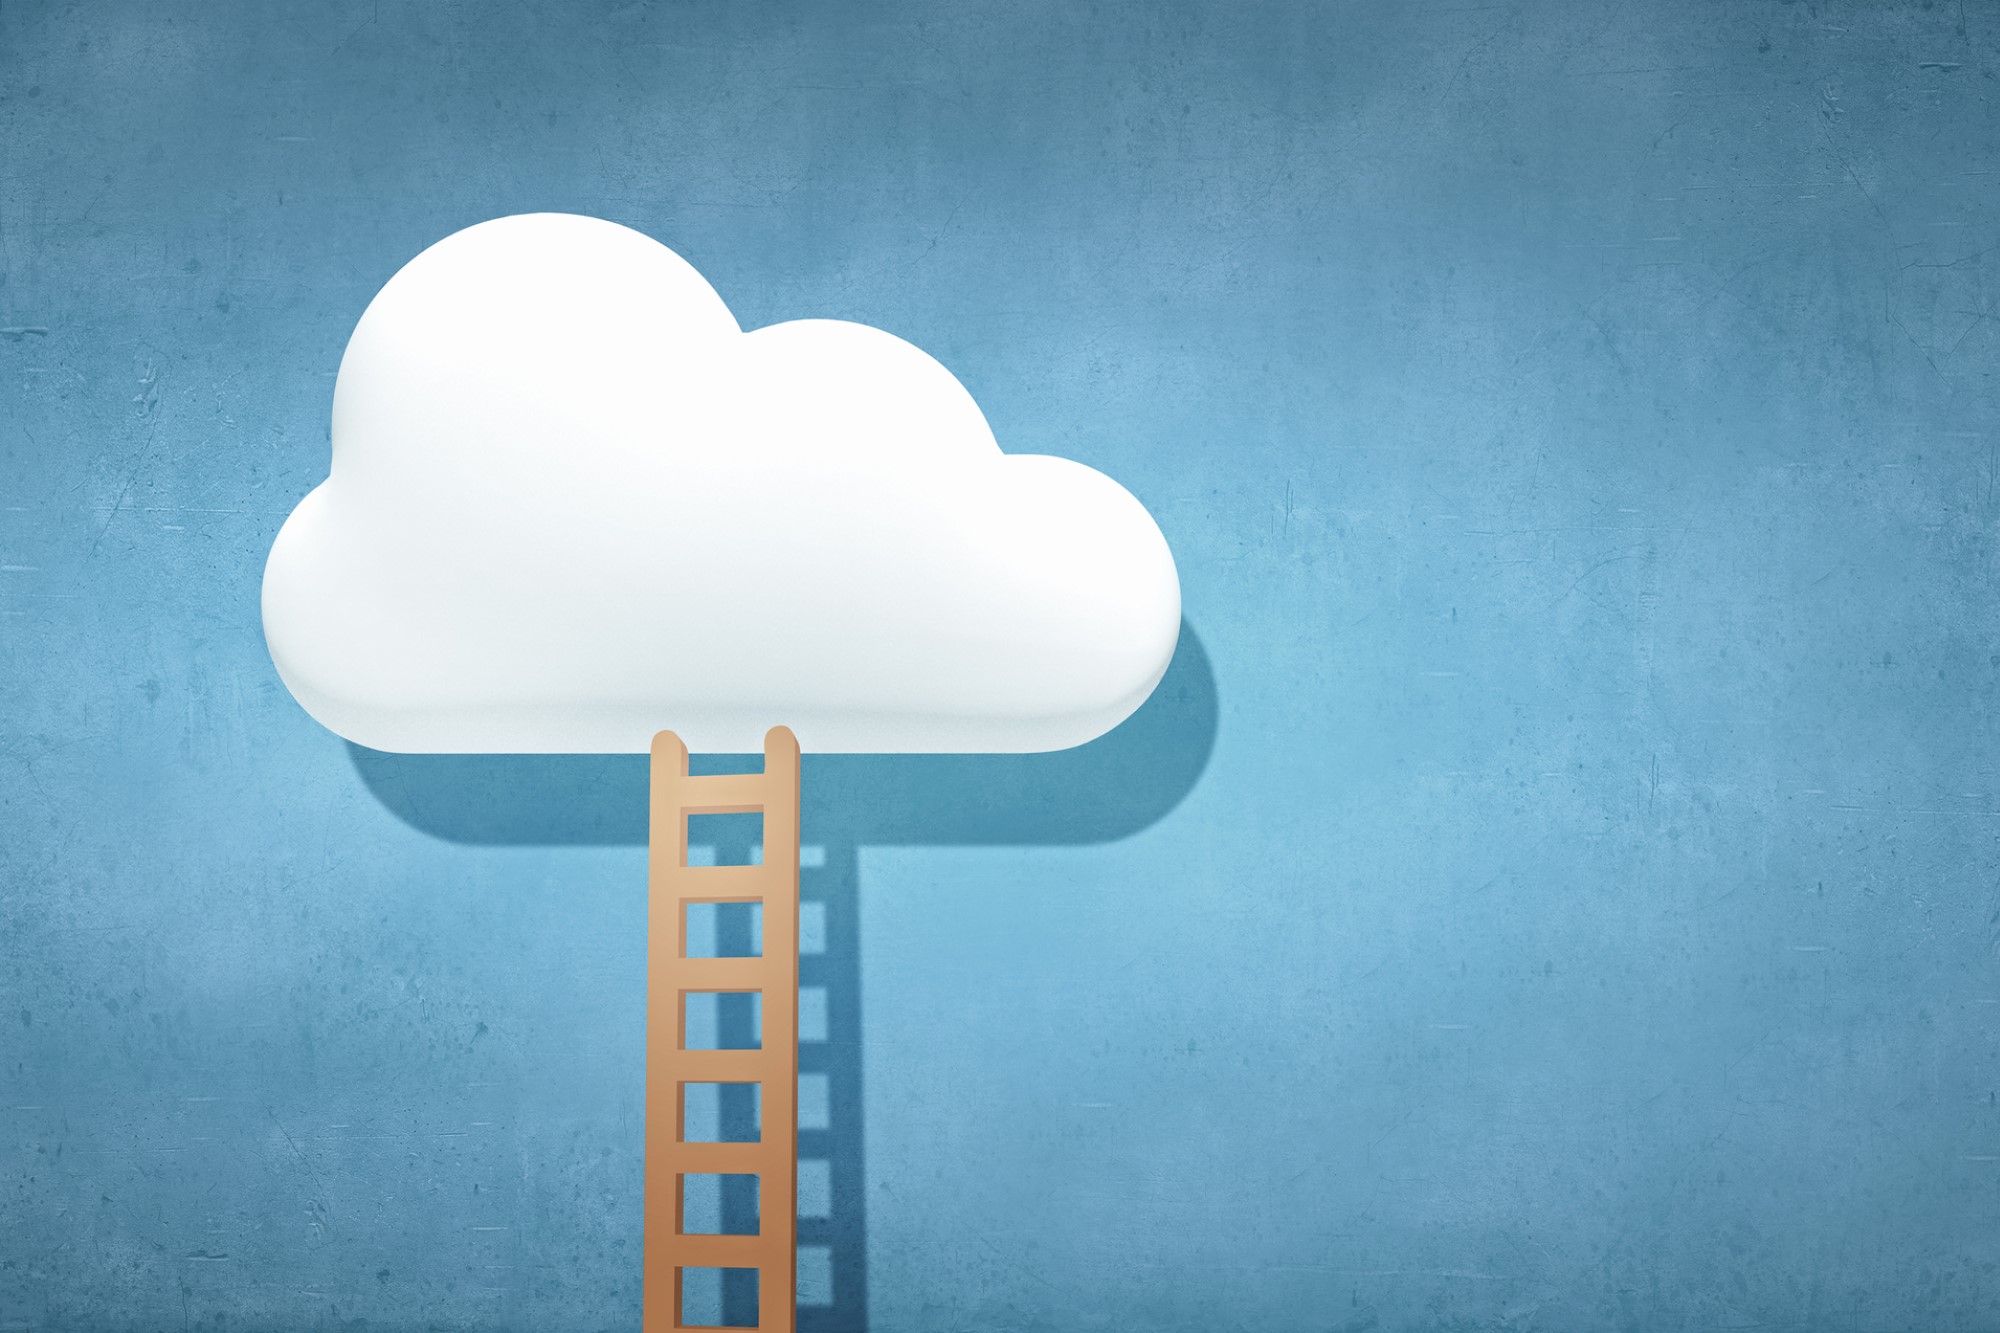 image of ladder with multiple rungs affixed to Twitter cloud